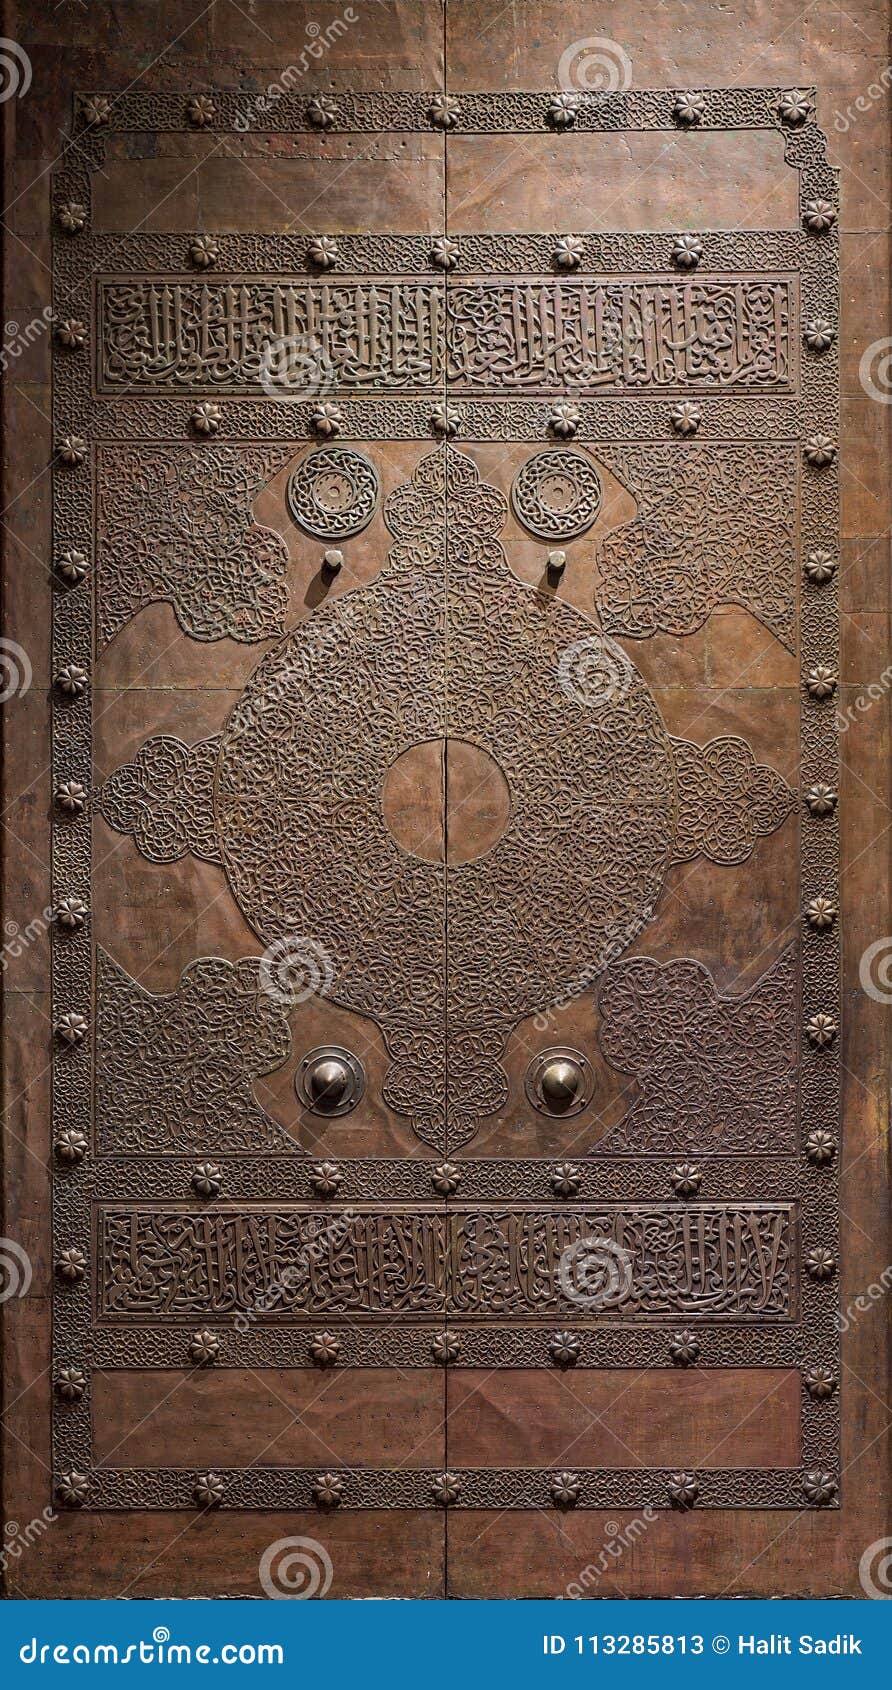 wooden decorated copper plated door from the mamluk era